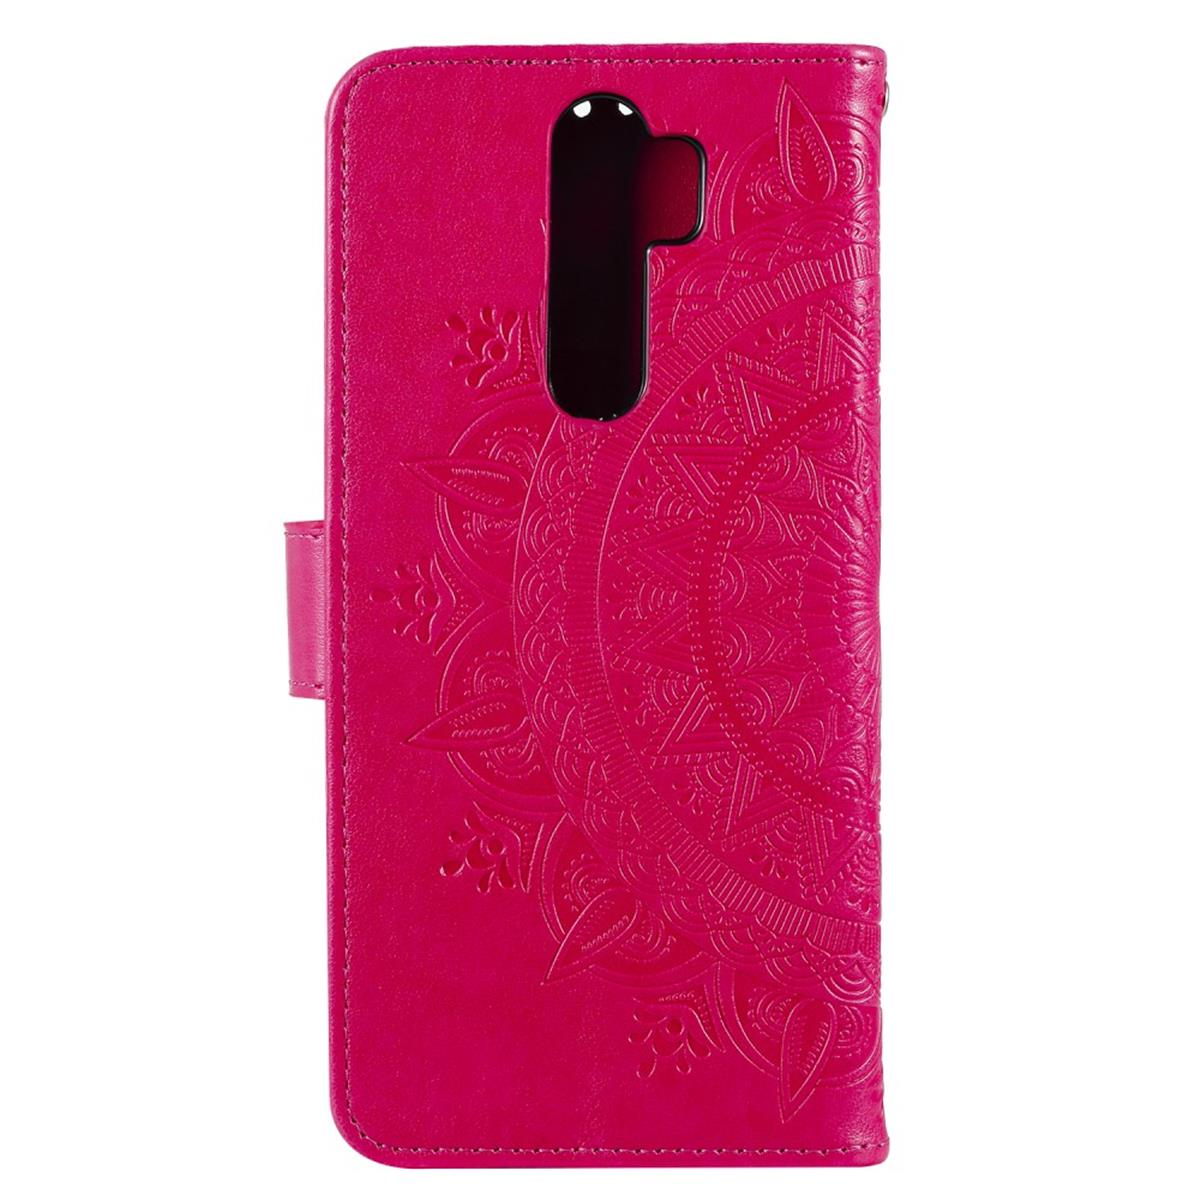 COVERKINGZ Klapphülle mit Mandala OnePlus, Muster, Pro, Pink 8 Bookcover